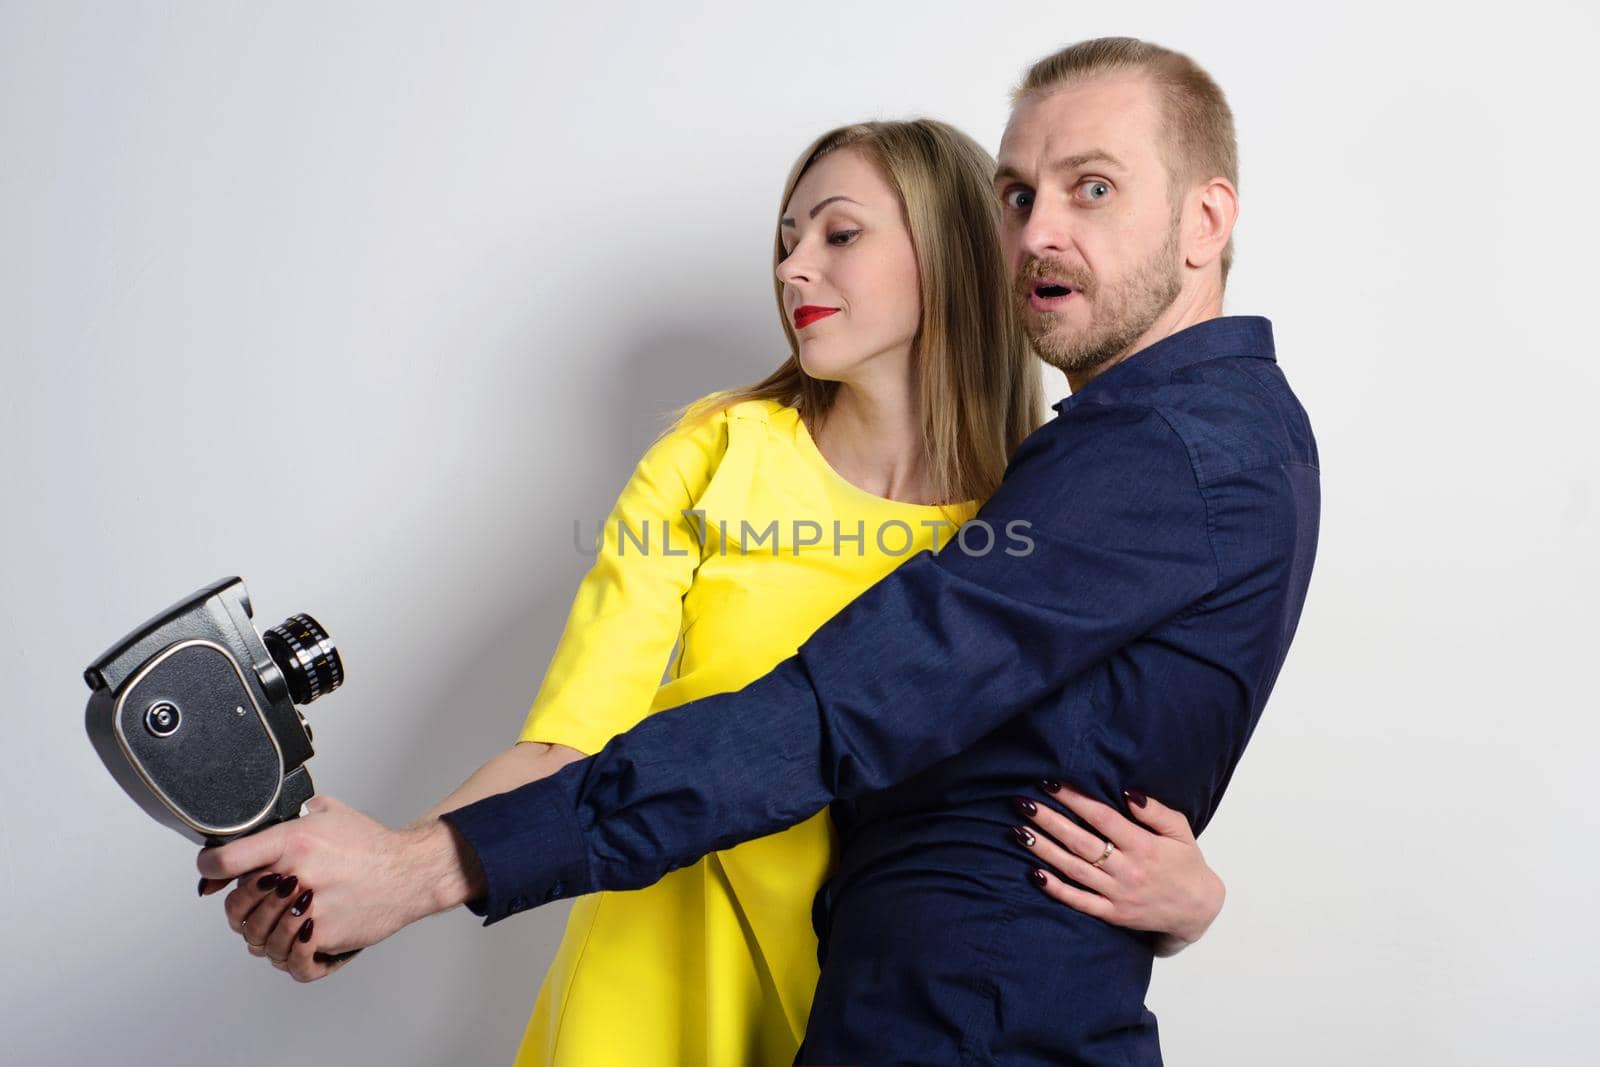 Surprised man in a blue shirt and a young slim girl in a yellow dress are hugging and shooting themselves on an old movie camera